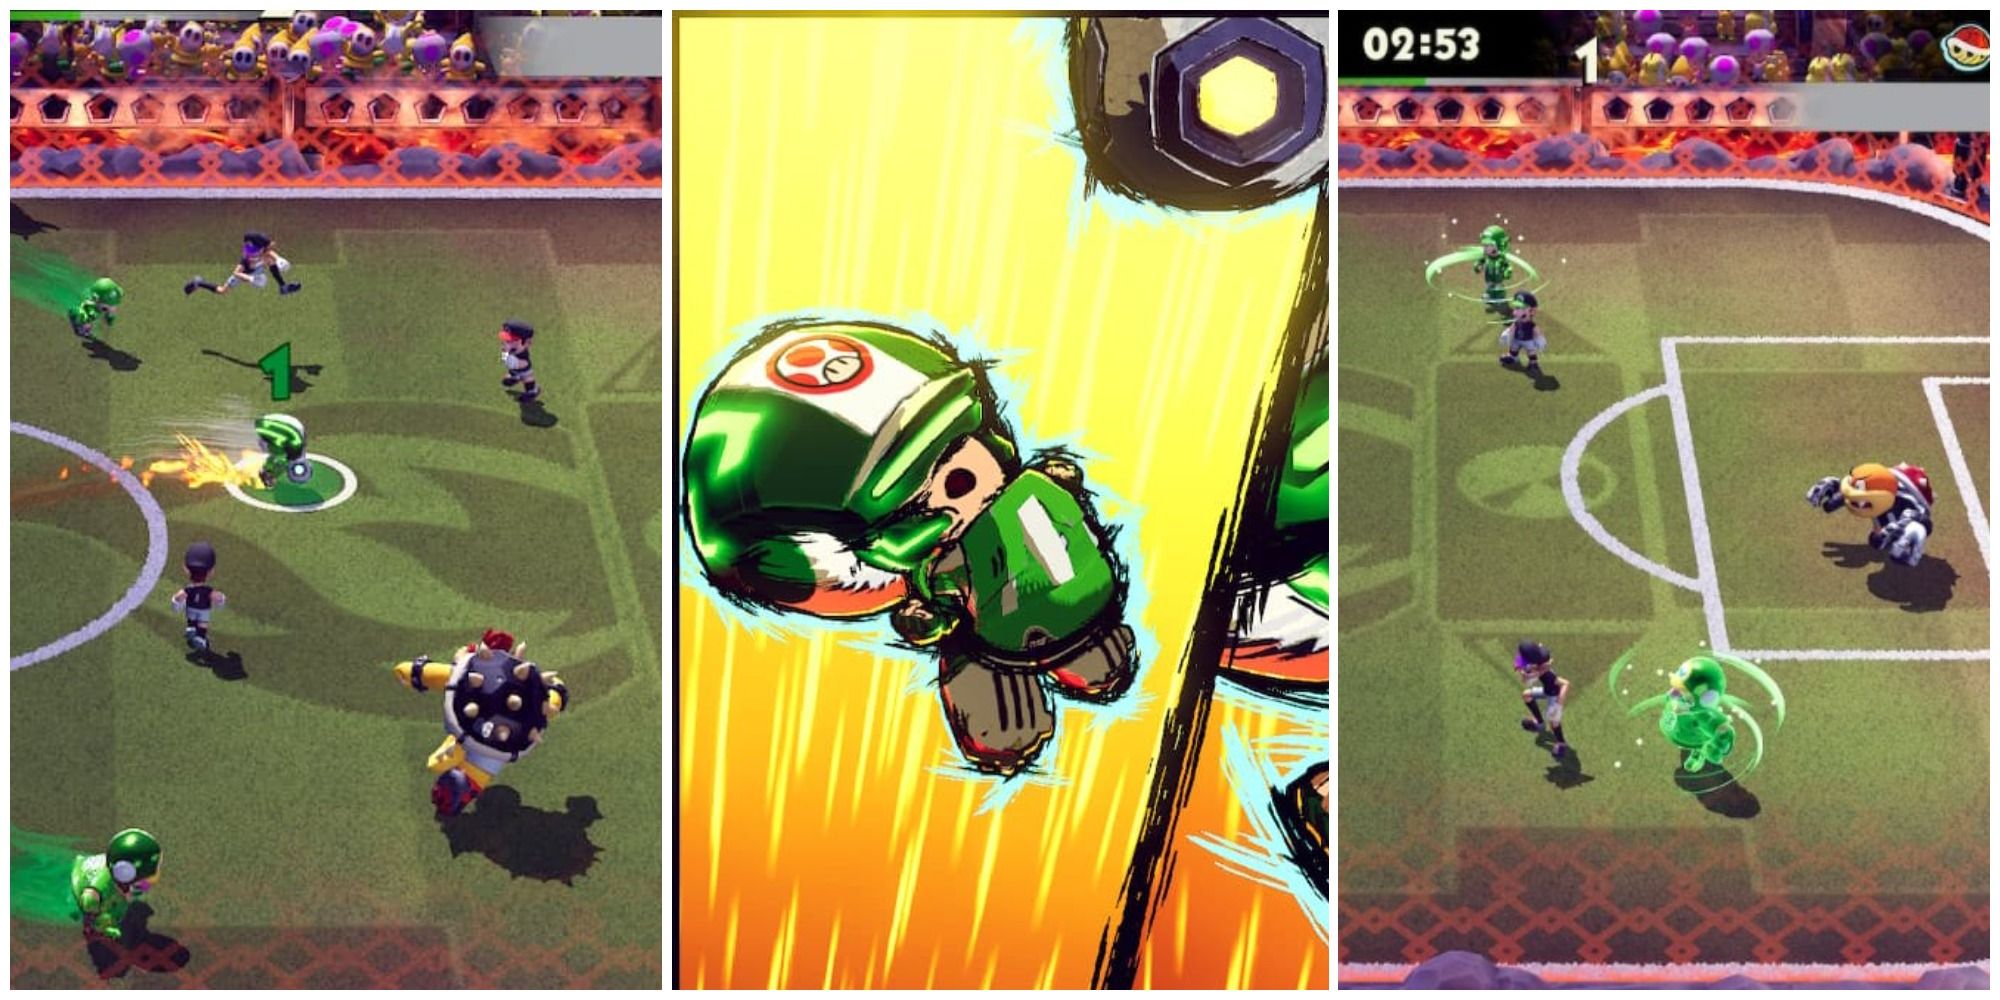 Split feature image featuring screenshots of Toad running through defenders, Toad performing a Hyper Strike, and Boom Boom waiting for a save in goal